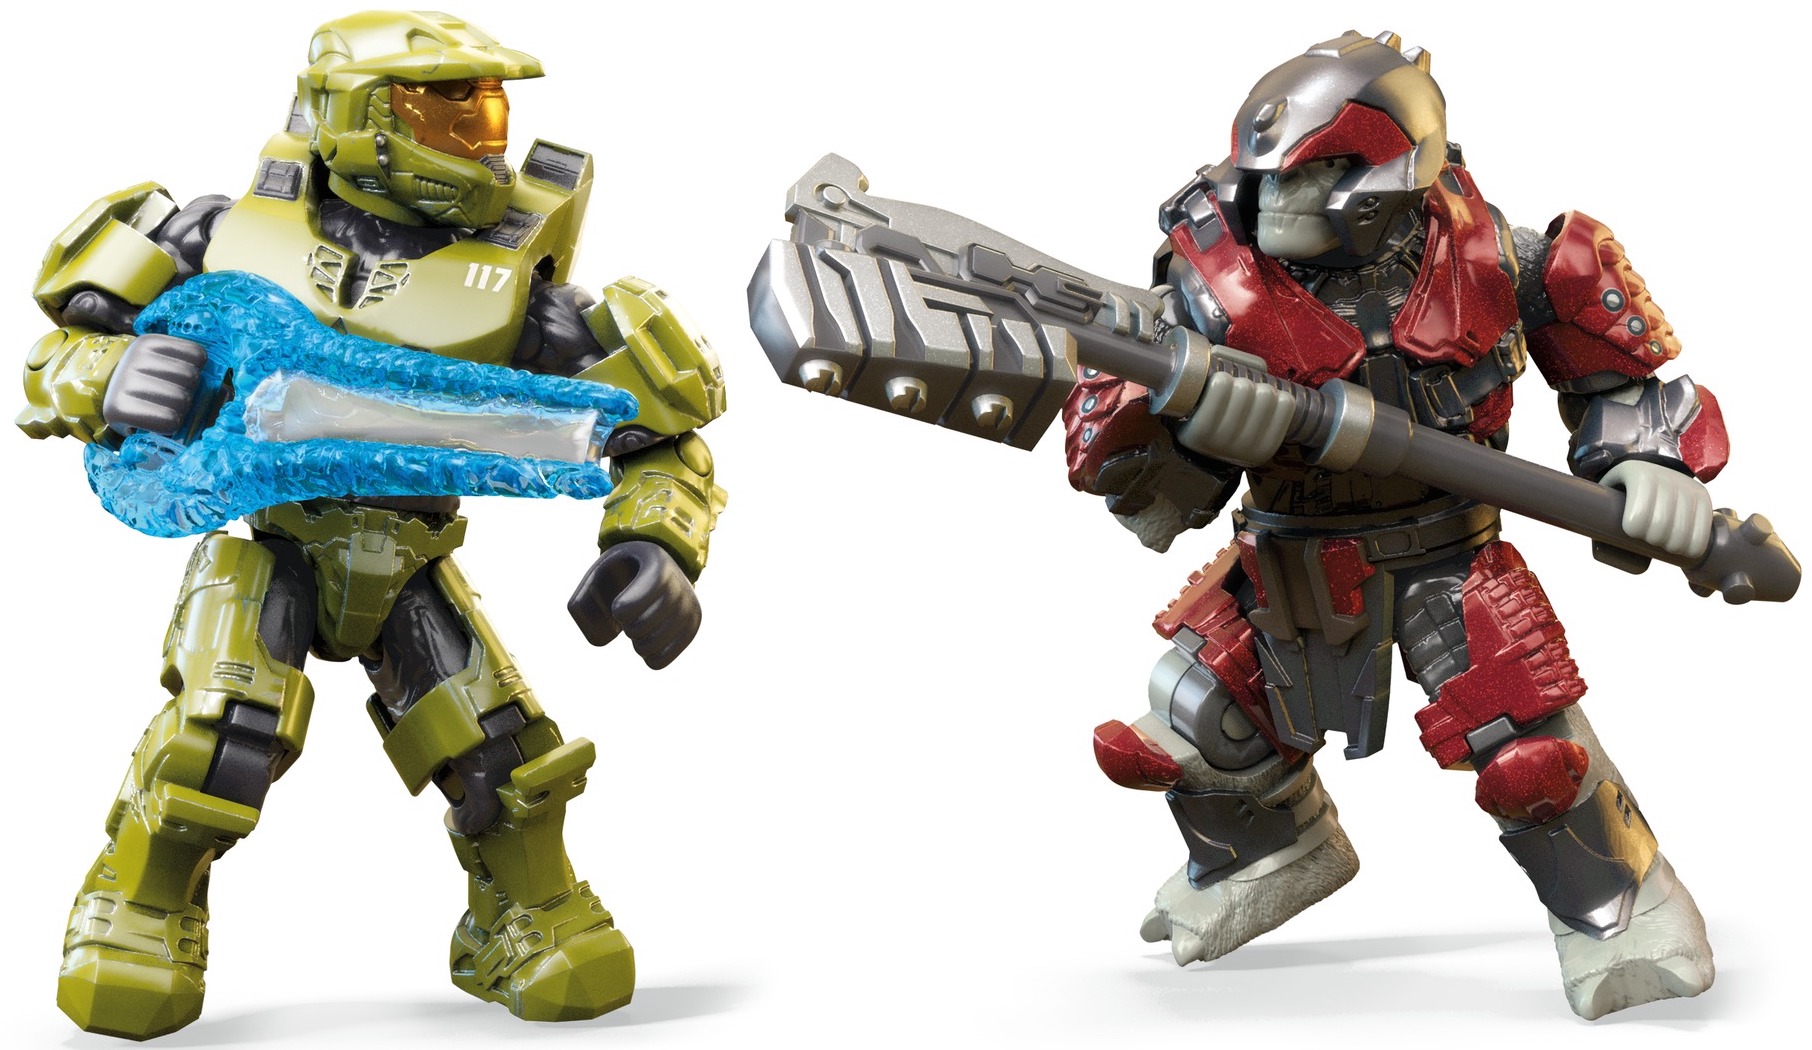 Mega Construx Halo Infinite Conflict Pack with Buildable Characters - image 4 of 6